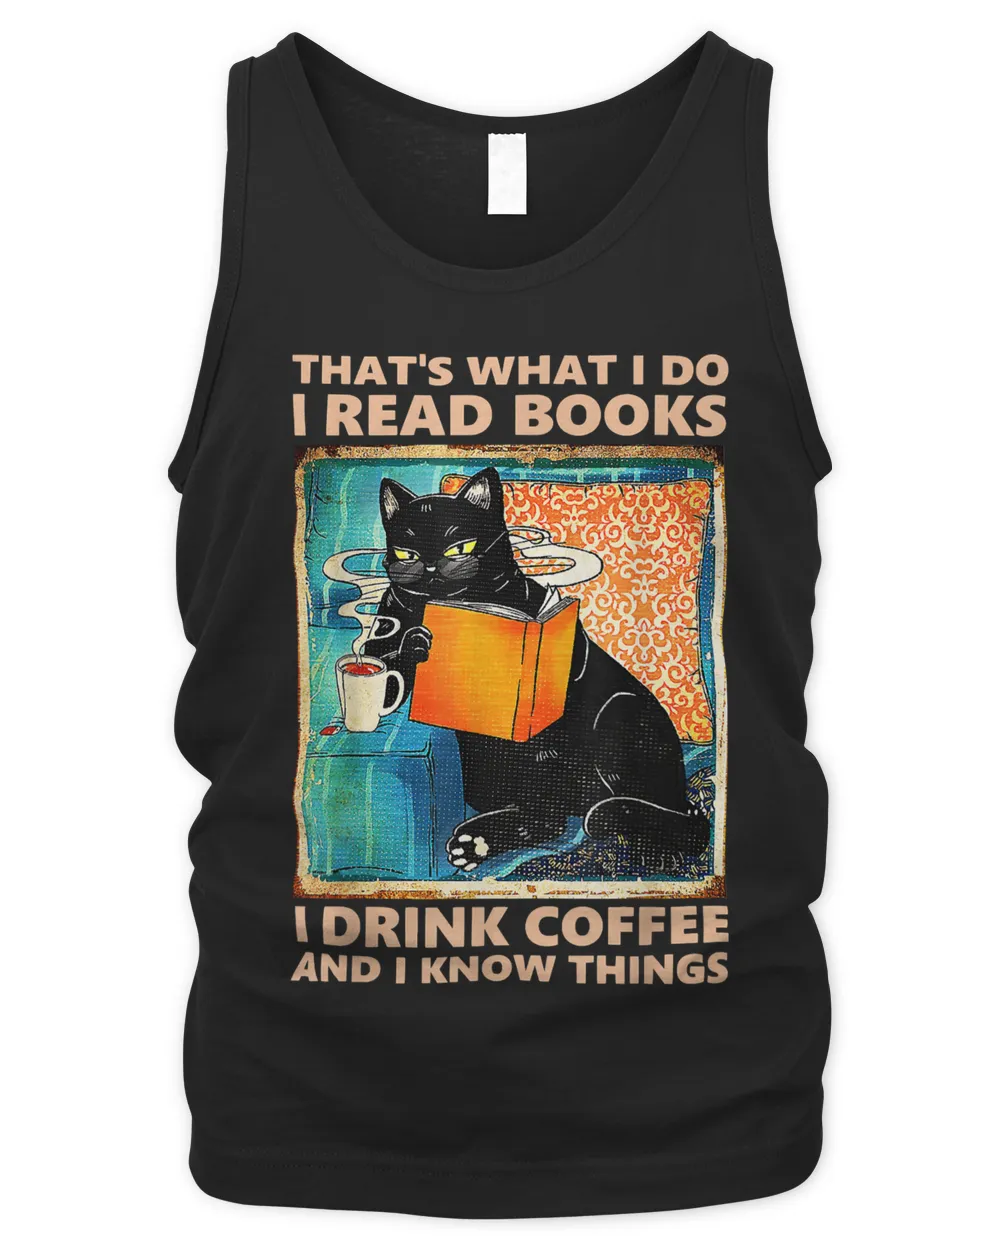 Thats What I Do I Read Book & I Drink Coffee Funny Bookworm72